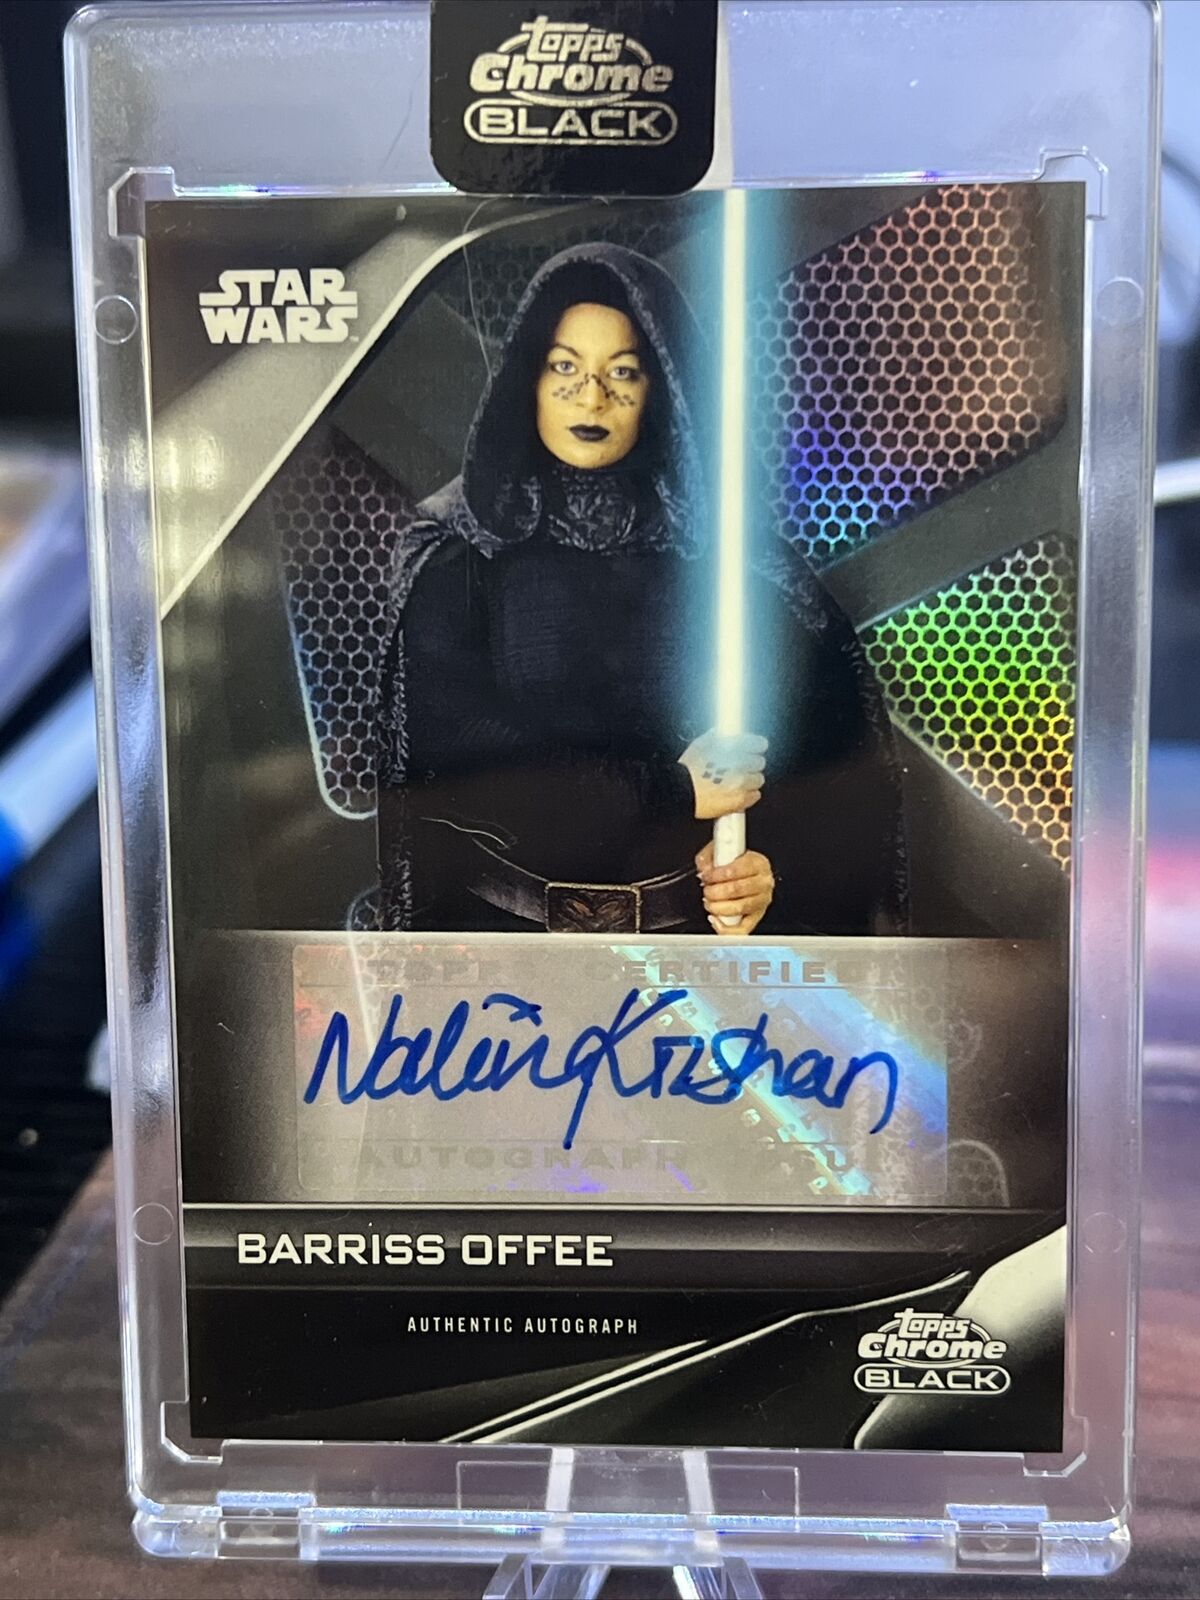 2023 Topps Chrome Black Star Wars Barriss Offee Refractor Auto A-KR